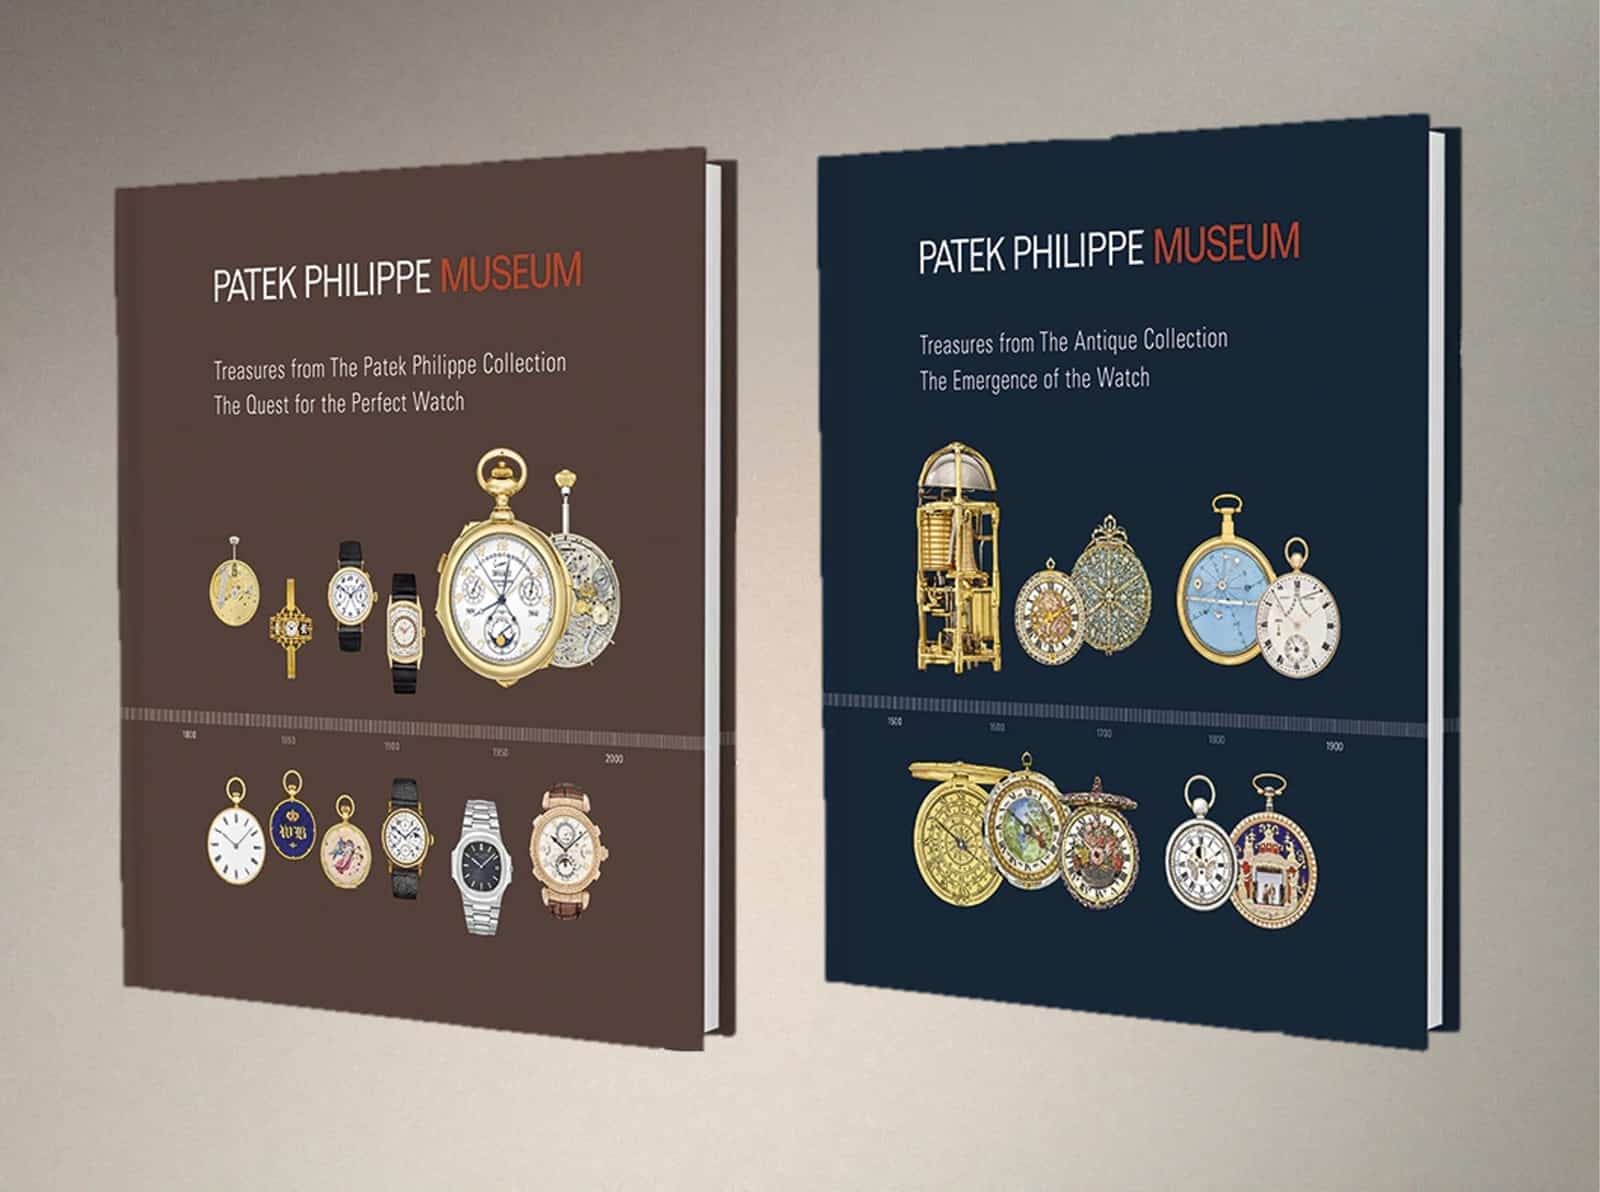 Patek Philippe Museum - zwei Bände - Treasures from the Antique Collection und Treasures from the Patek Philippe Collection - teNeues Verlag